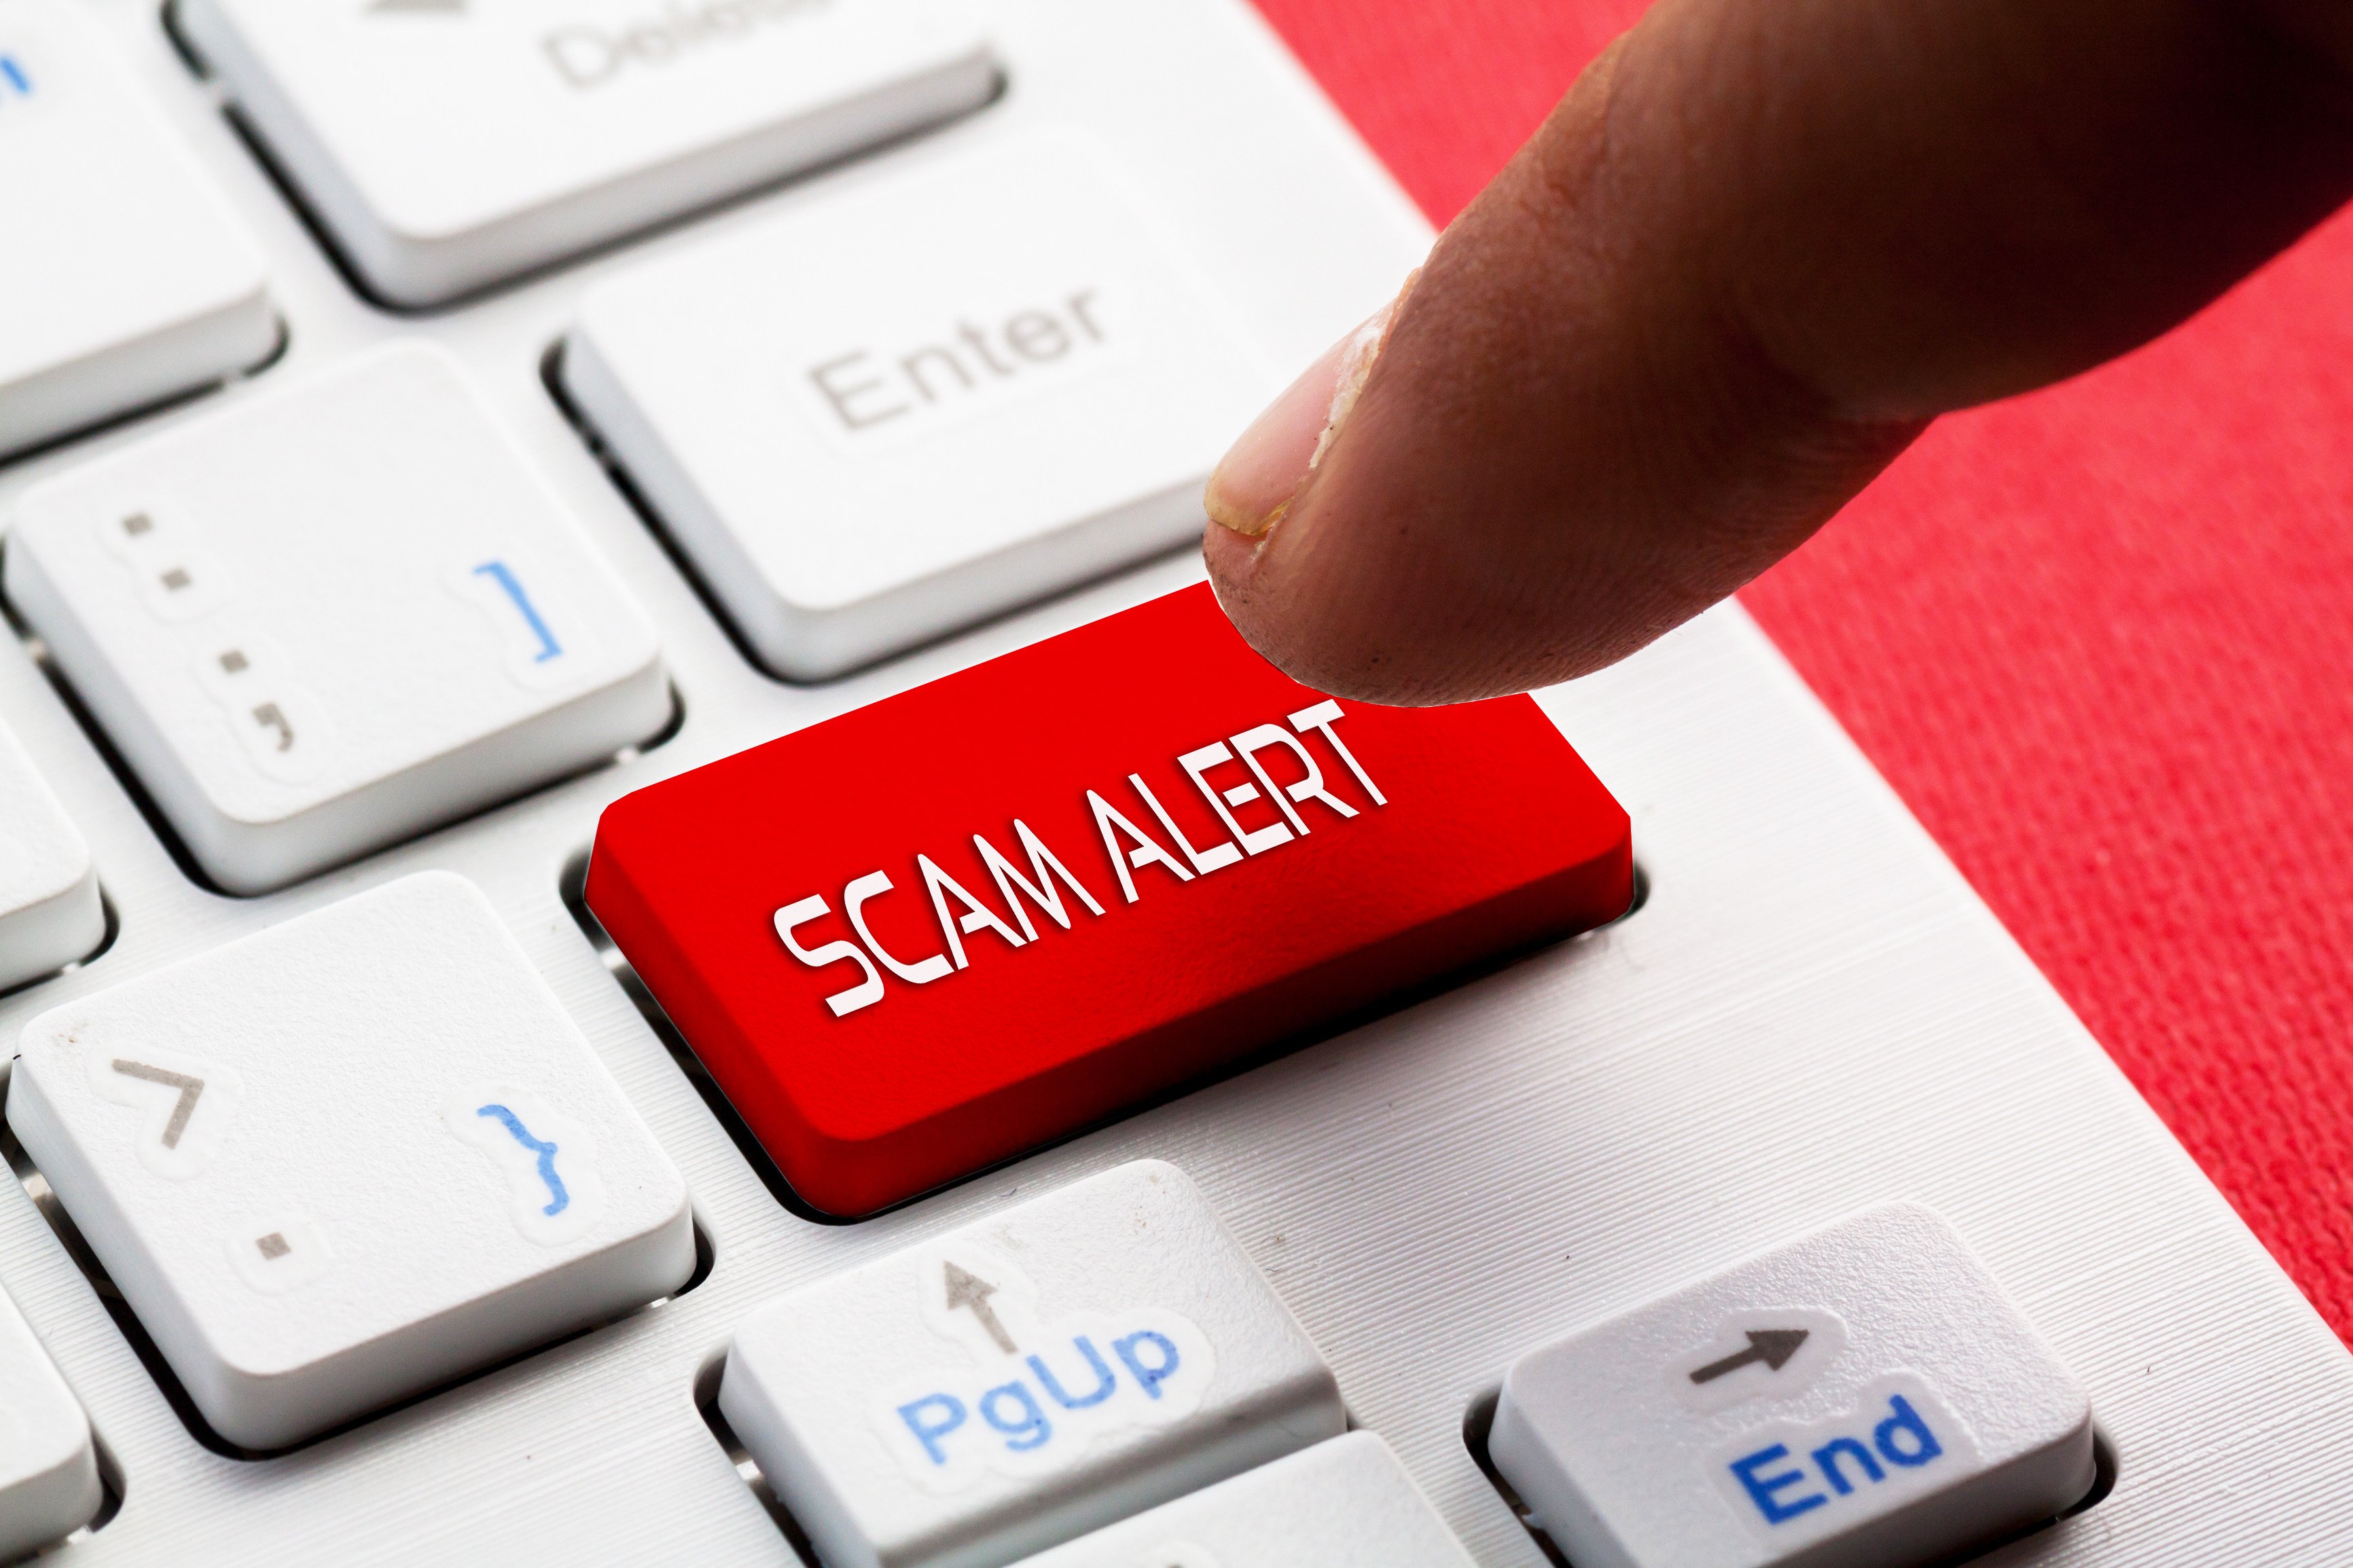 China’s public security ministry announced a nationwide campaign to battle fraud after state media published several reports about individuals or groups that have scammed investors and the public by leveraging the credibility of state institutions. Photo: Shutterstock Images